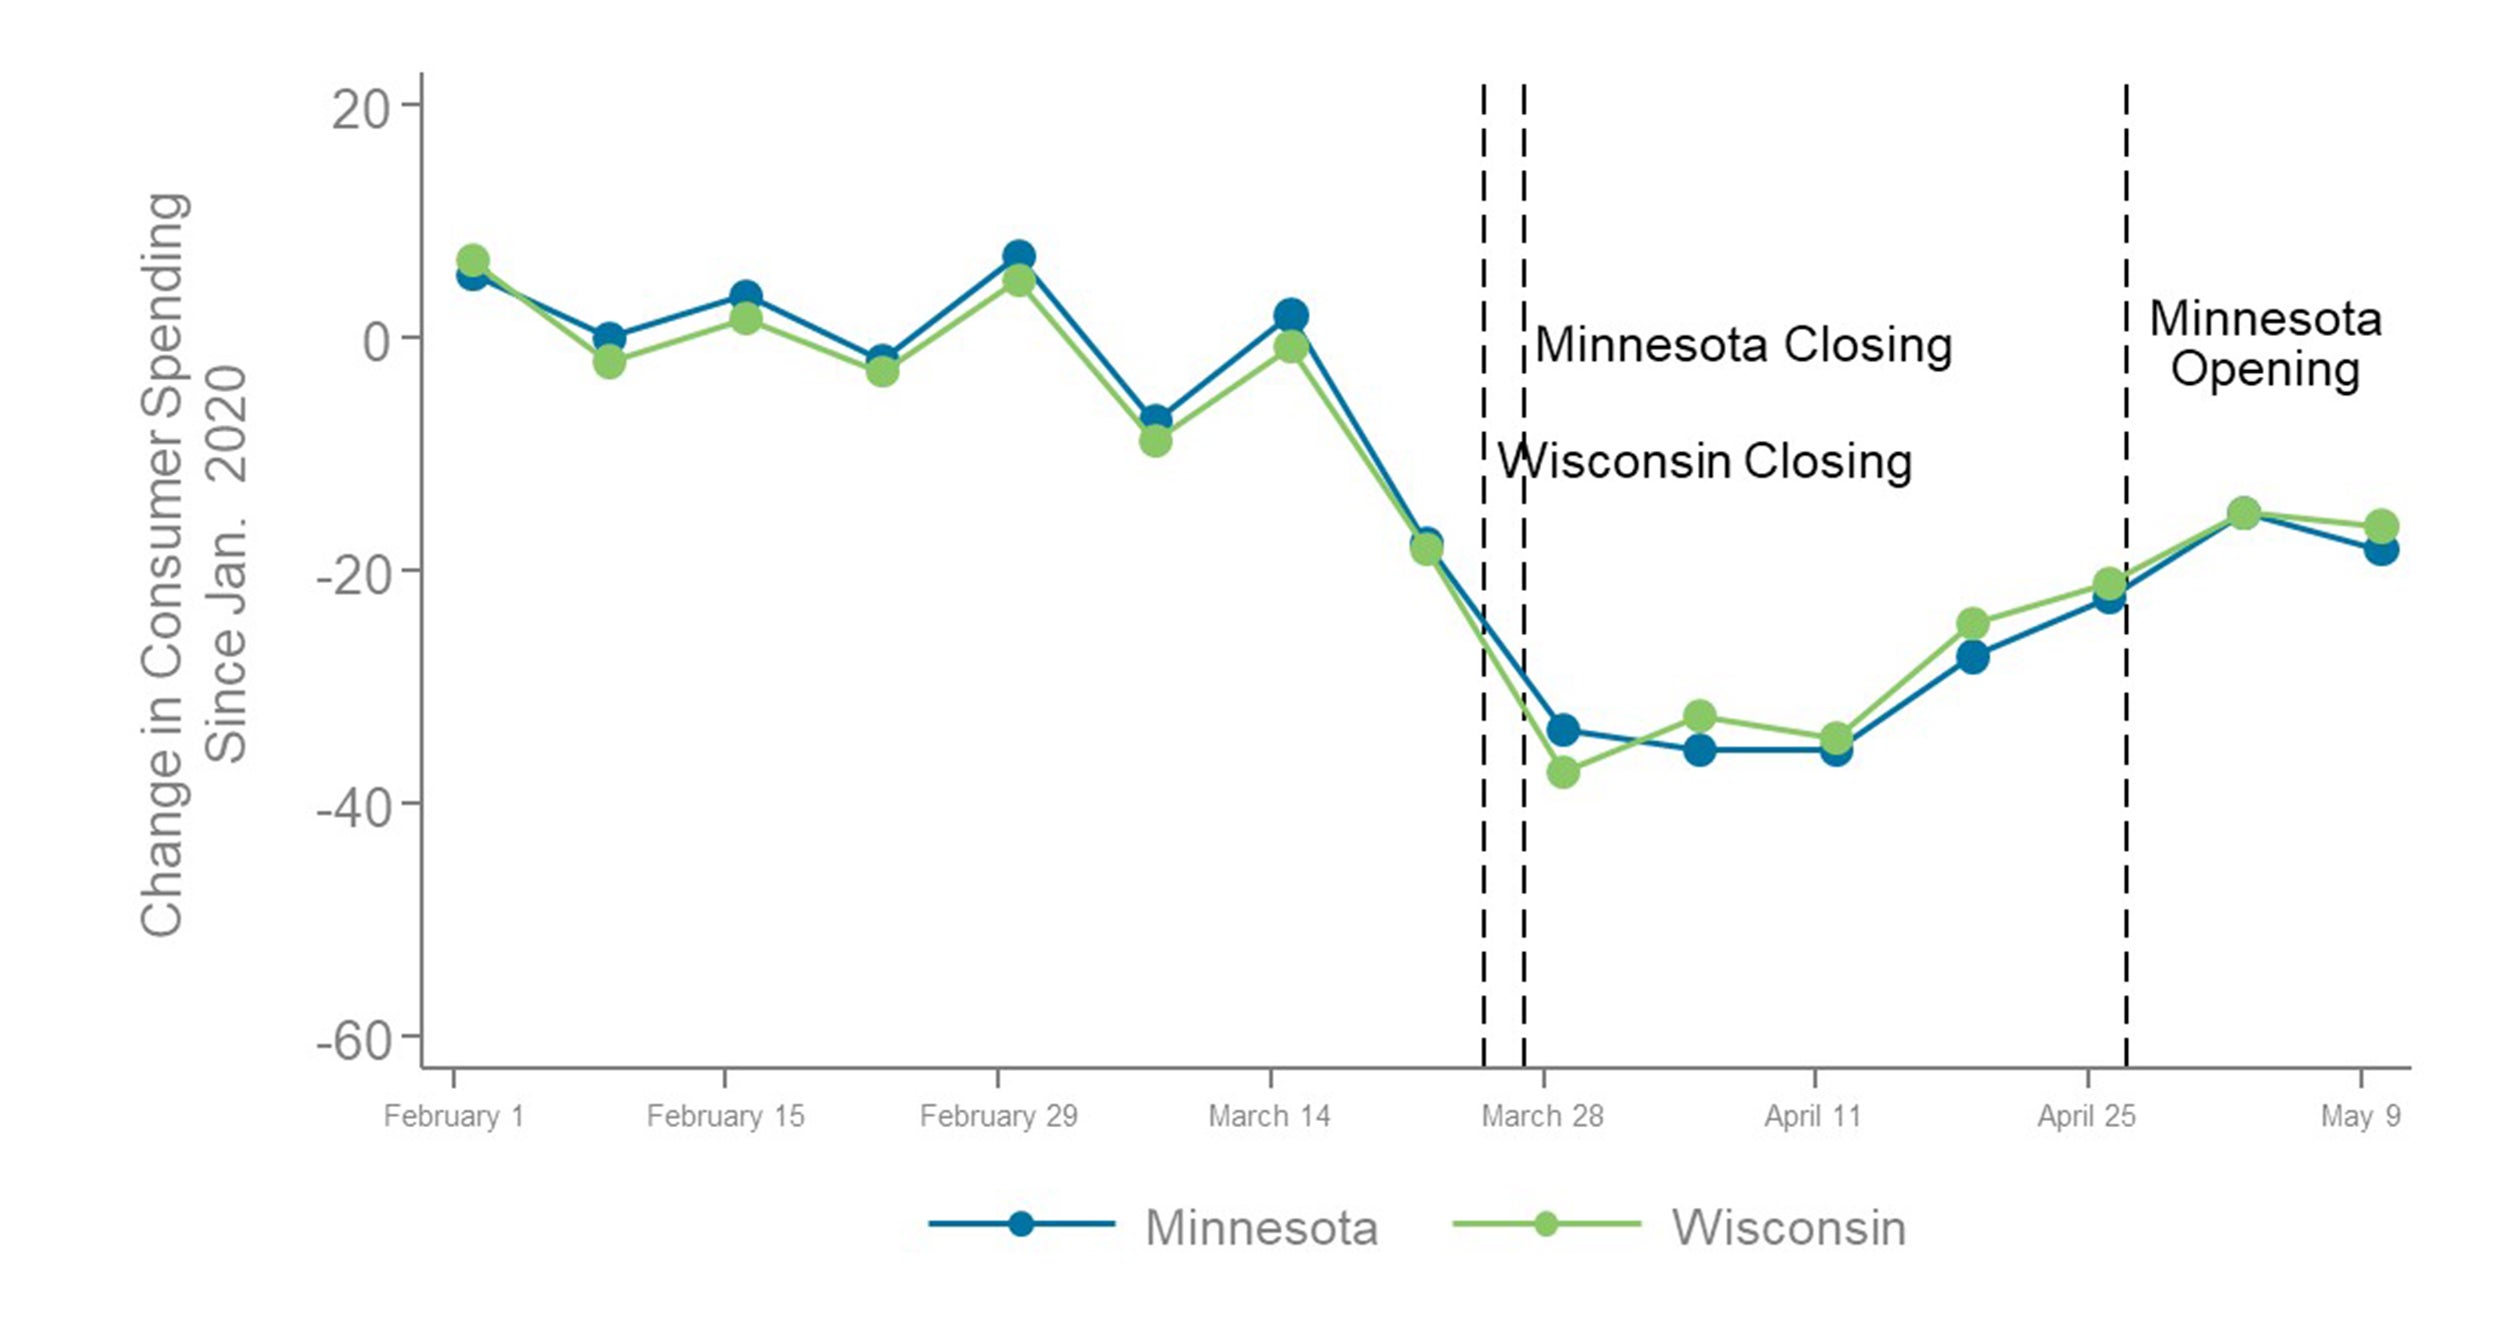 Comparing levels of consumer spending in Minnesota and Wisconsin before and after reopening.